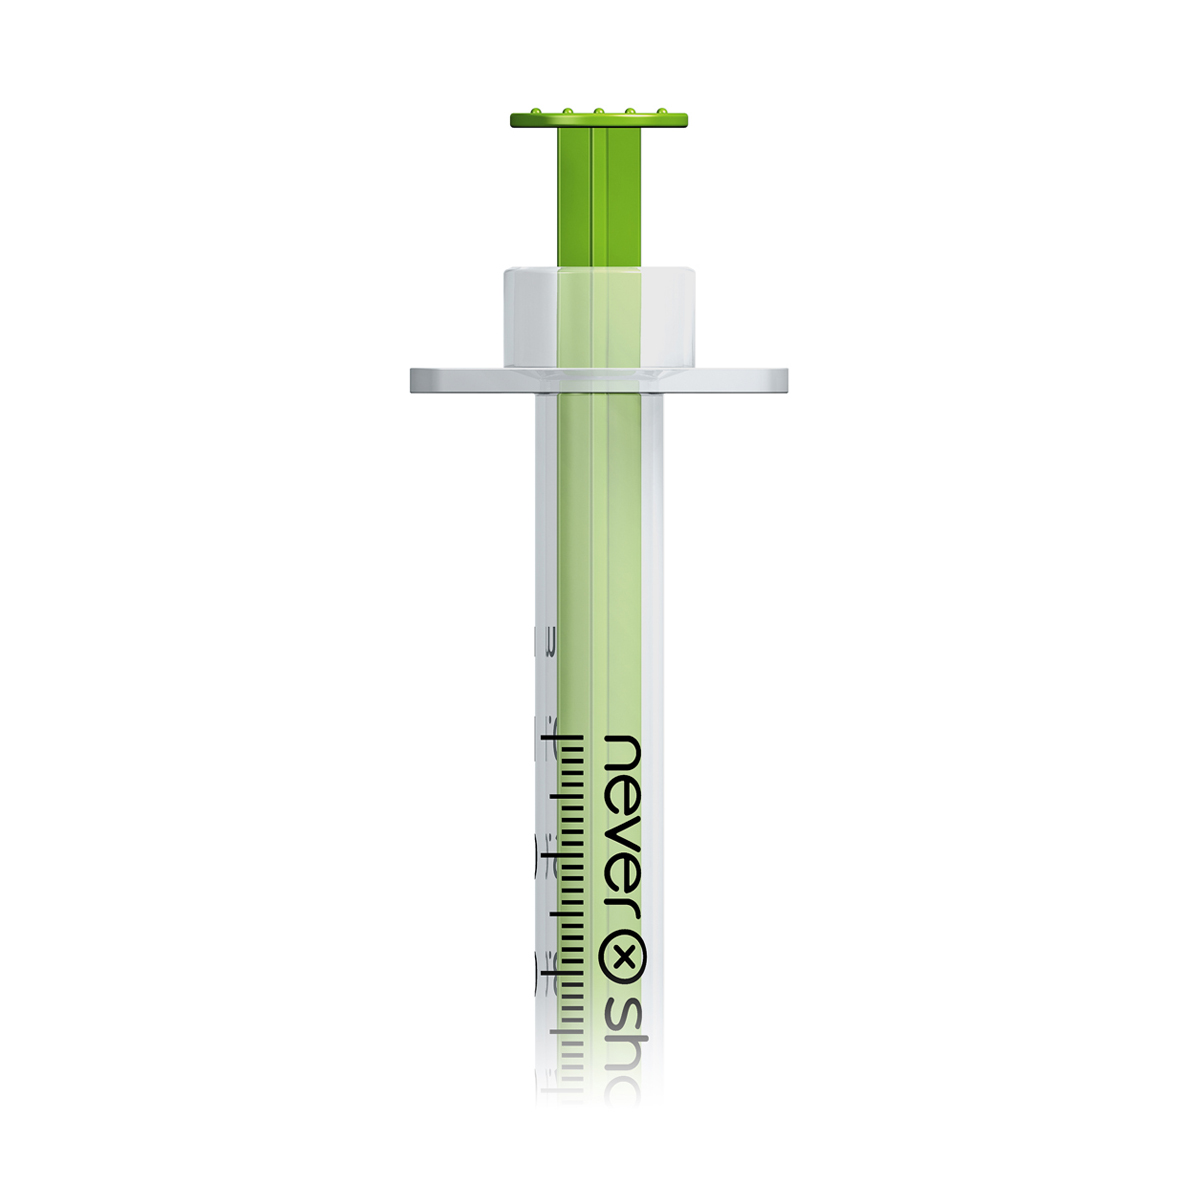 Nevershare 1ml 30G fixed needle syringe: green  (discontinued, see below)